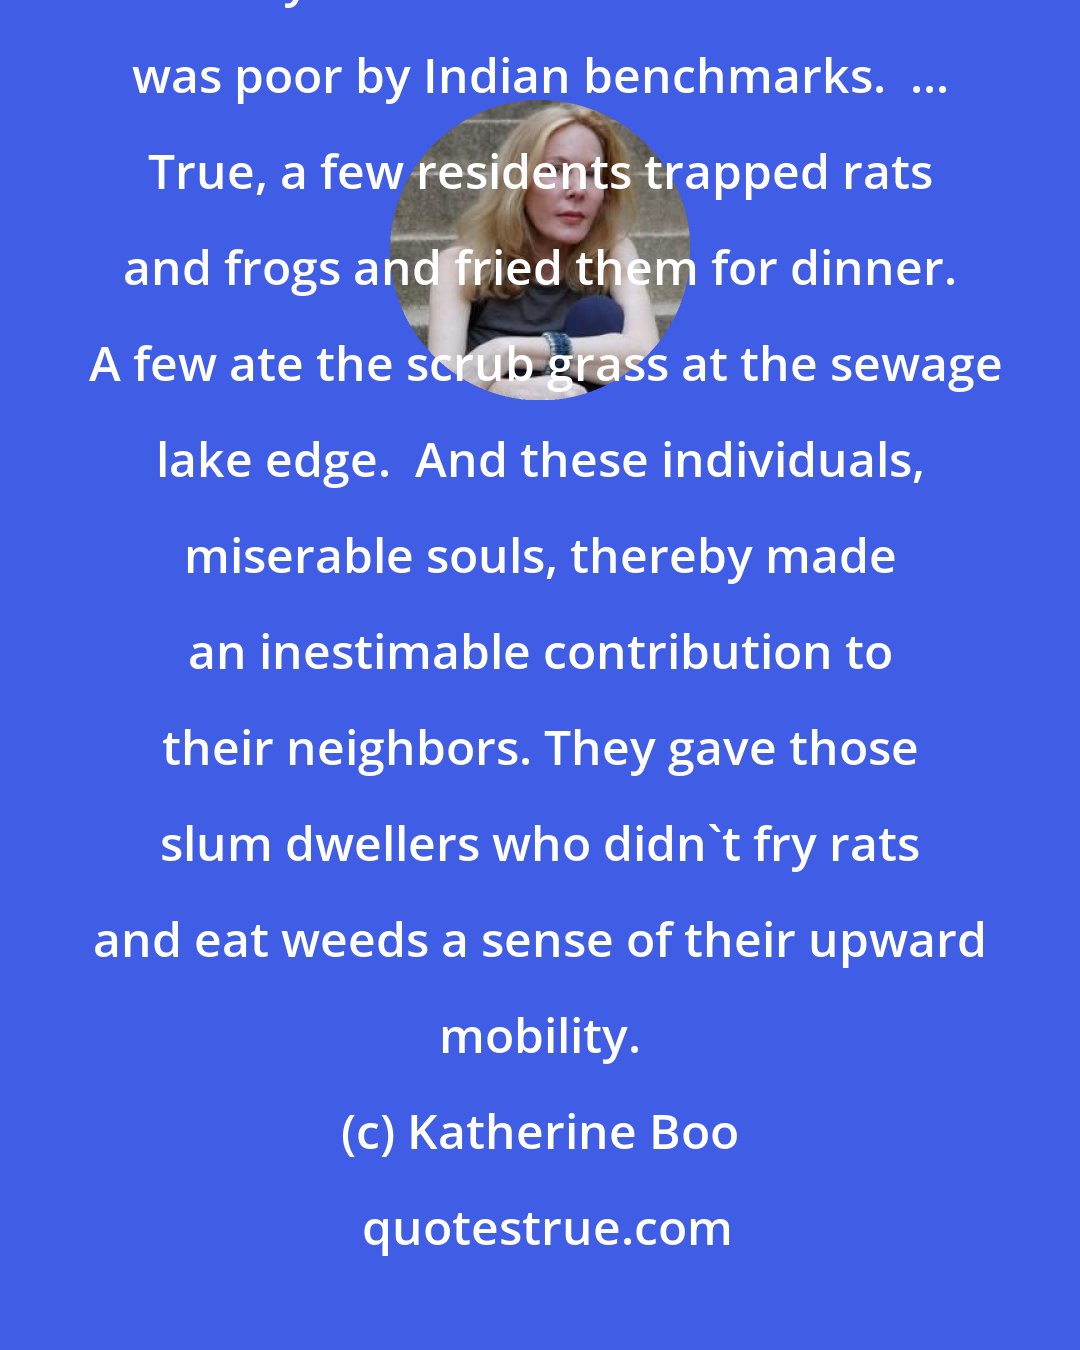 Katherine Boo: One chronicler writes of an area of India during the end of the 20th century: Almost no-one in this slum was poor by Indian benchmarks.  ... True, a few residents trapped rats and frogs and fried them for dinner.  A few ate the scrub grass at the sewage lake edge.  And these individuals, miserable souls, thereby made an inestimable contribution to their neighbors. They gave those slum dwellers who didn't fry rats and eat weeds a sense of their upward mobility.